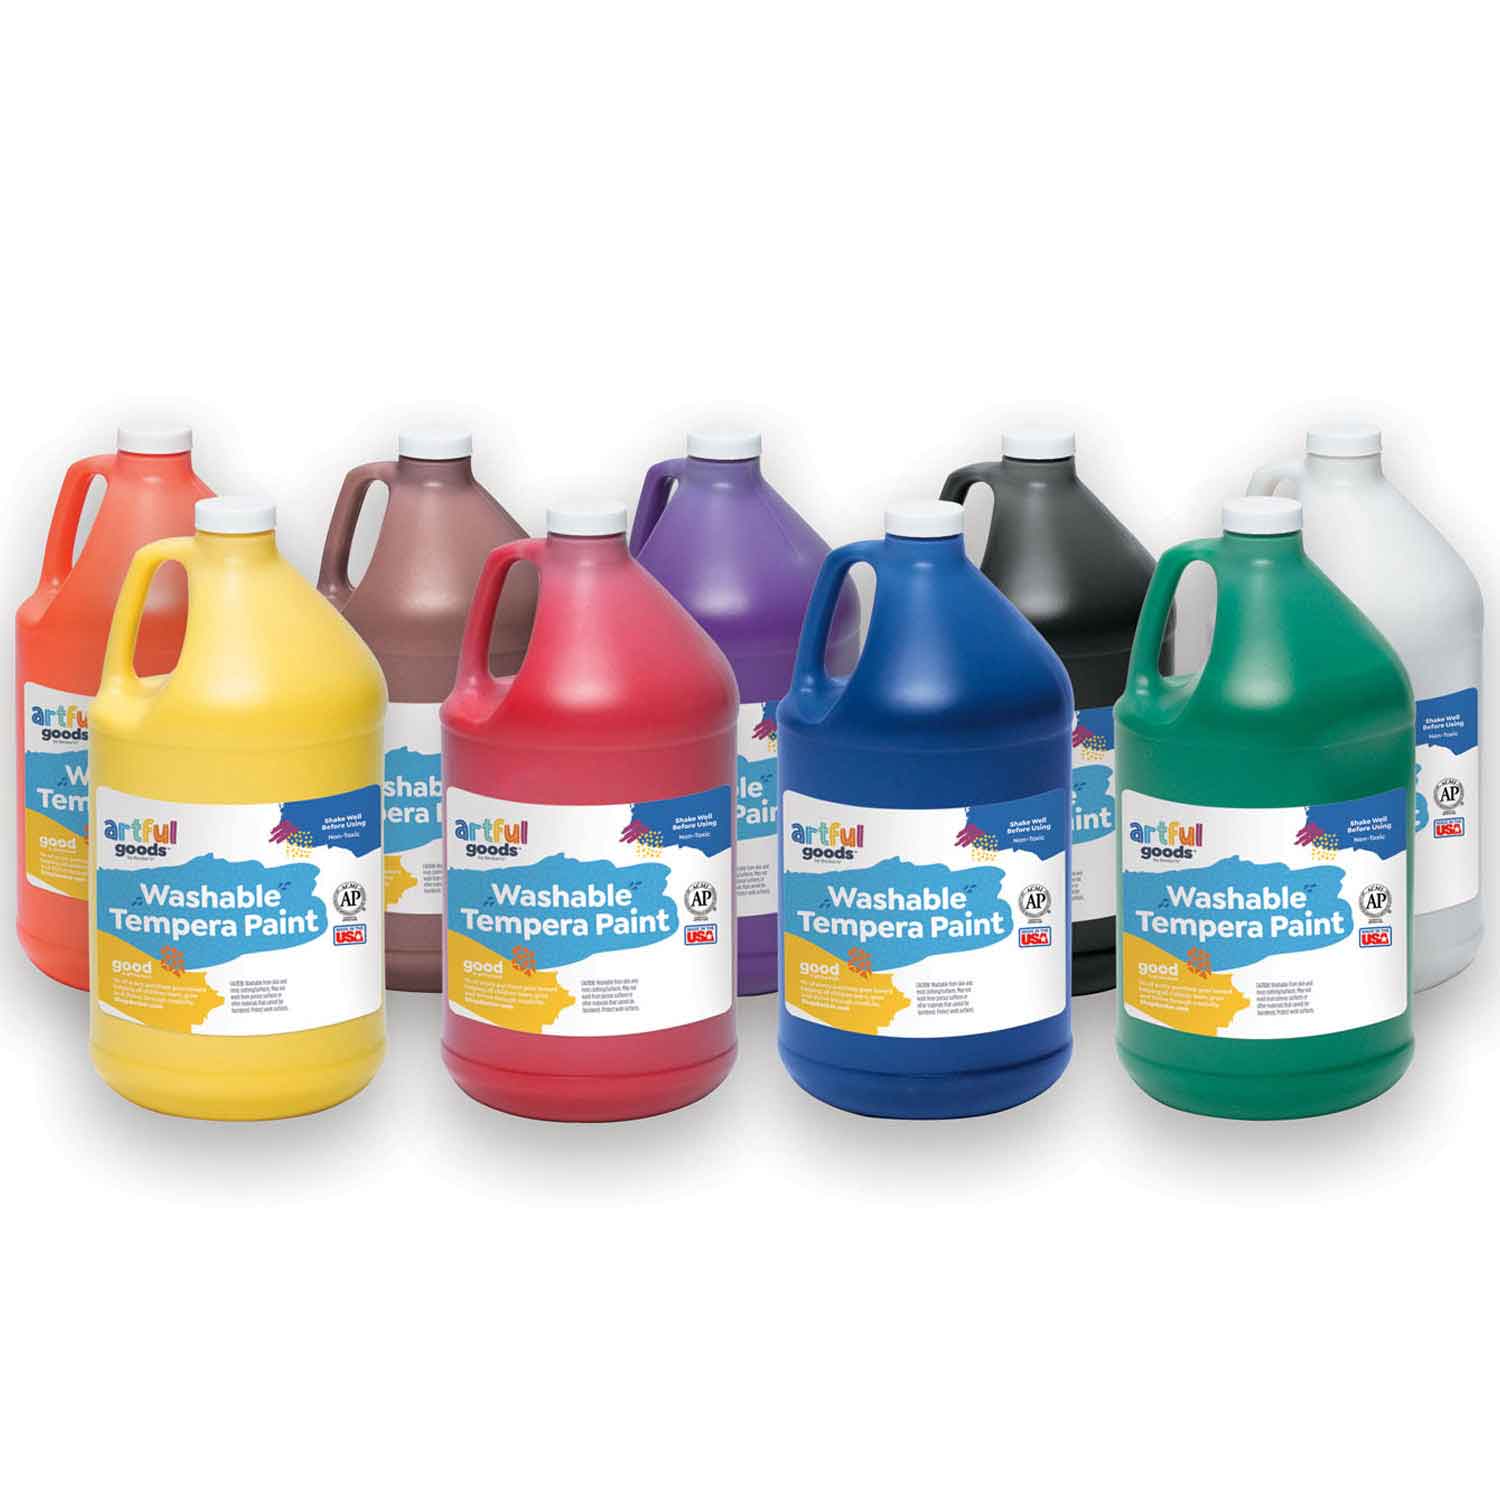  Crayola Washable Tempera Paint for Kids, Pink Paint, Classroom  Supplies, Non Toxic, 16 Oz Squeeze Bottle : Toys & Games